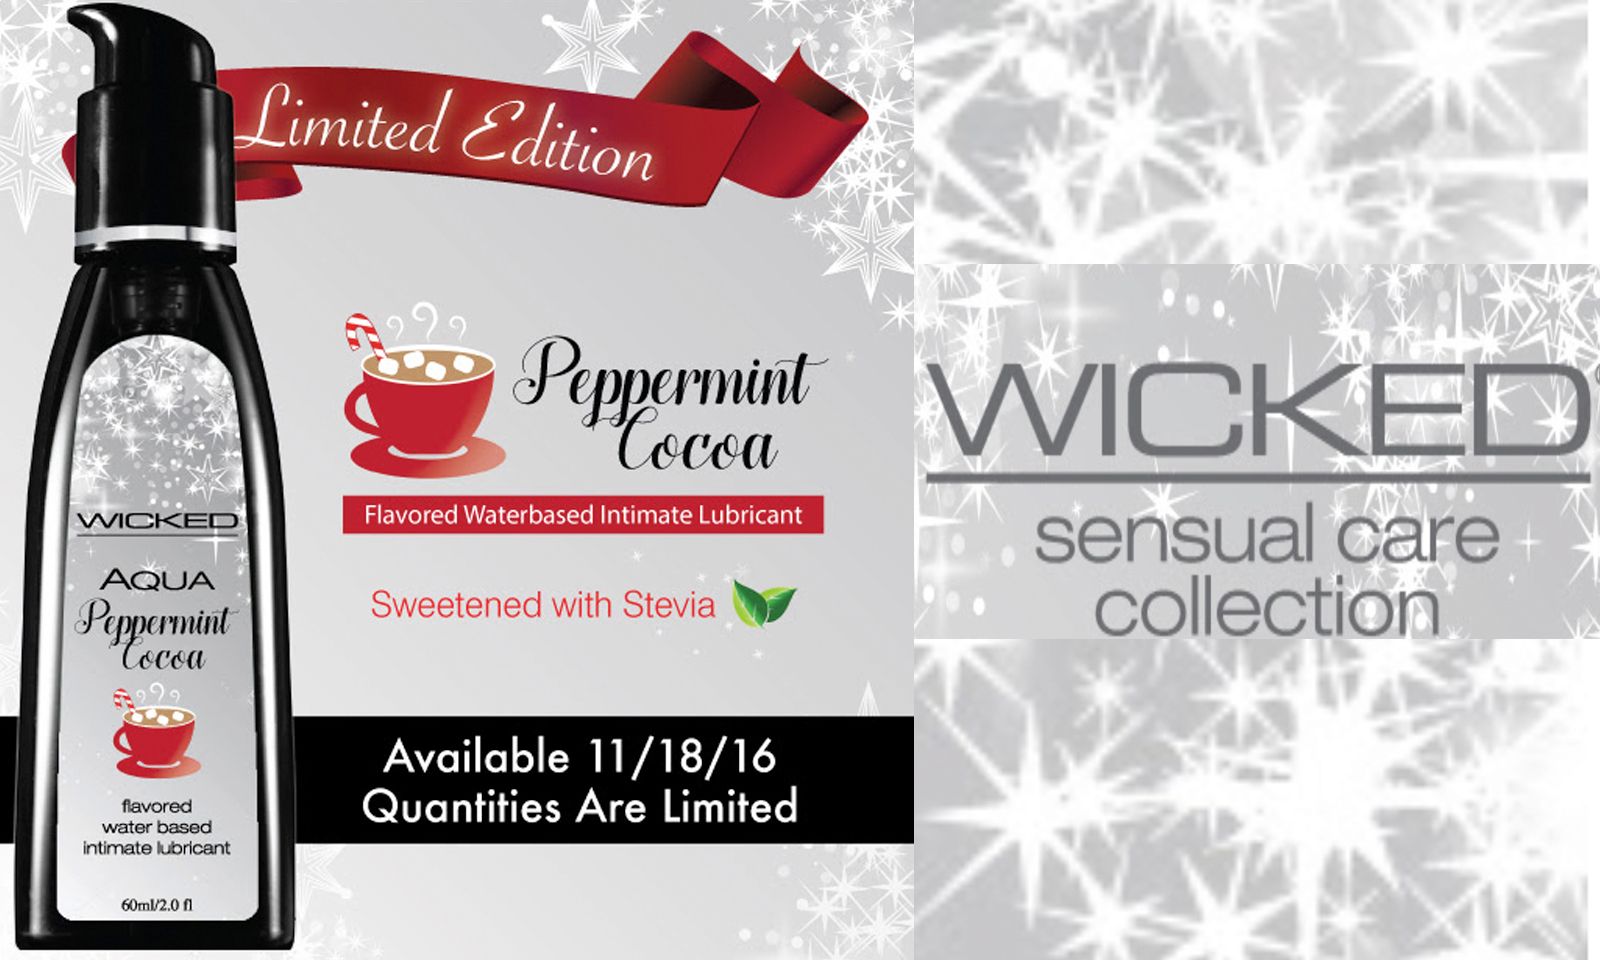 Wicked Sensual Care To Debut Limited Edition Peppermint Cocoa Flavor